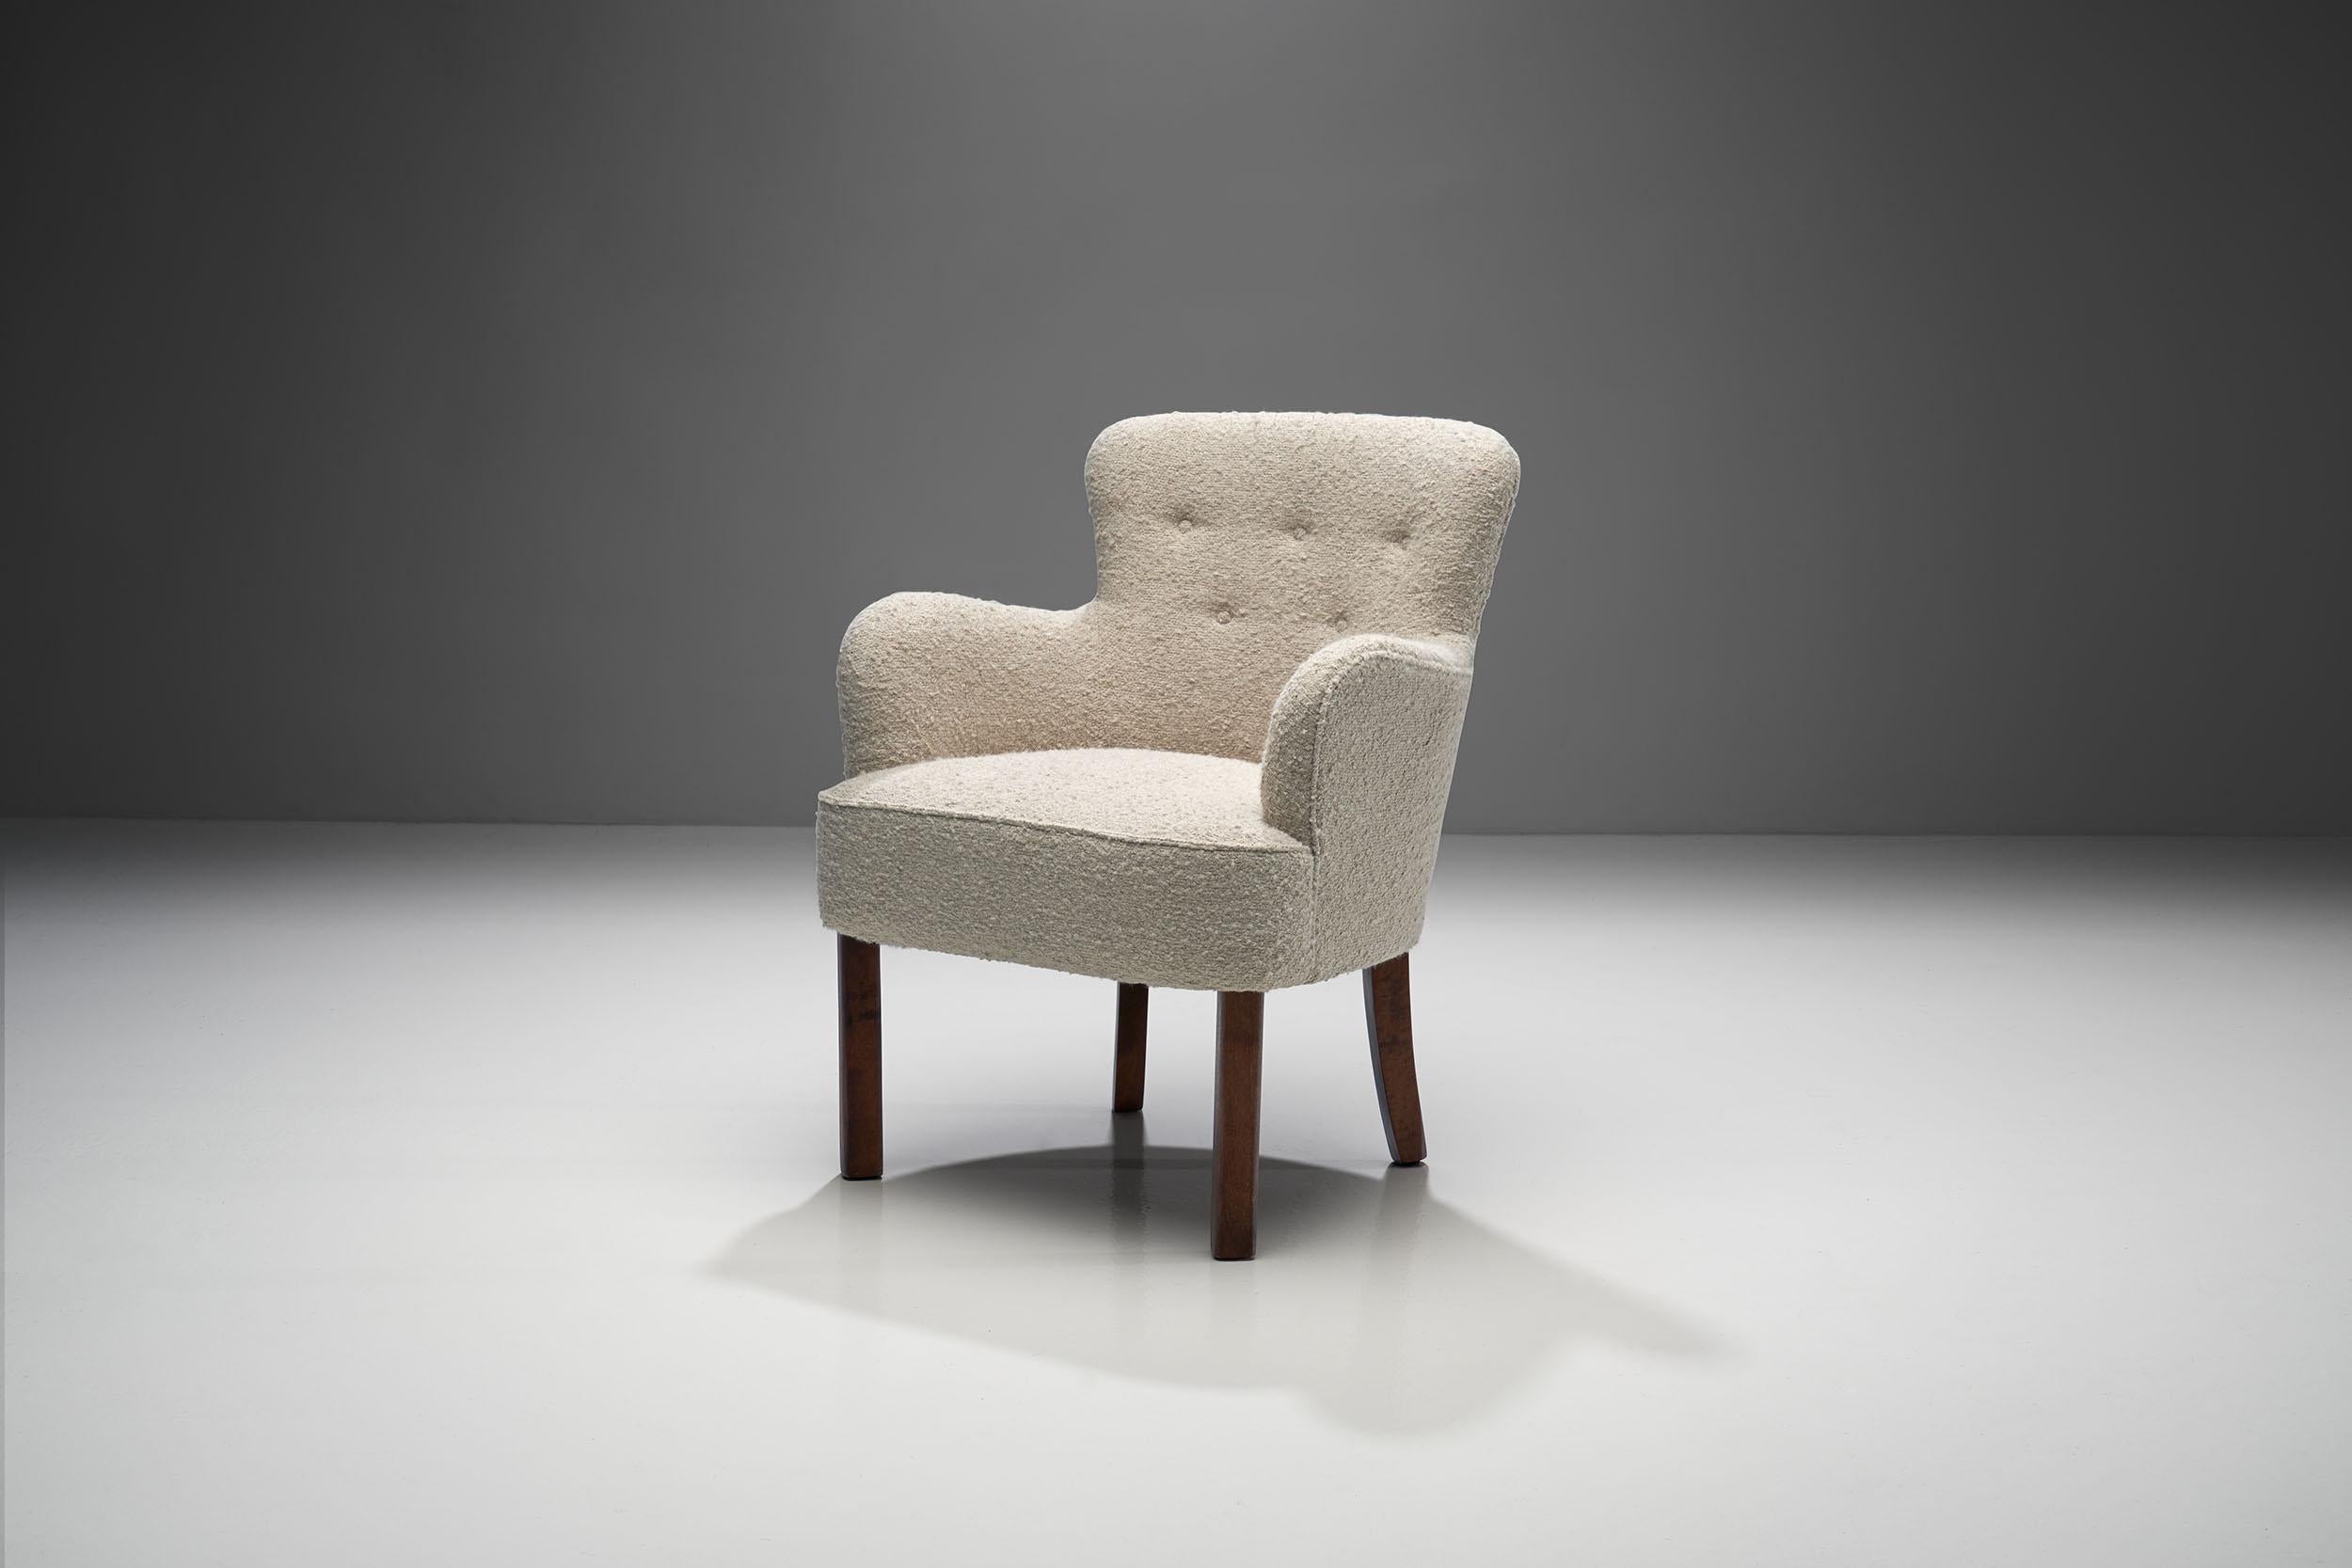 Small wool and oak midcentury armchair by a Danish cabinet maker.

This stylish chair demonstrates why midcentury Danish design is so popular to this day. With its rounded edges, cozy wool upholstery, and soft colors, this chair is ideal to blend